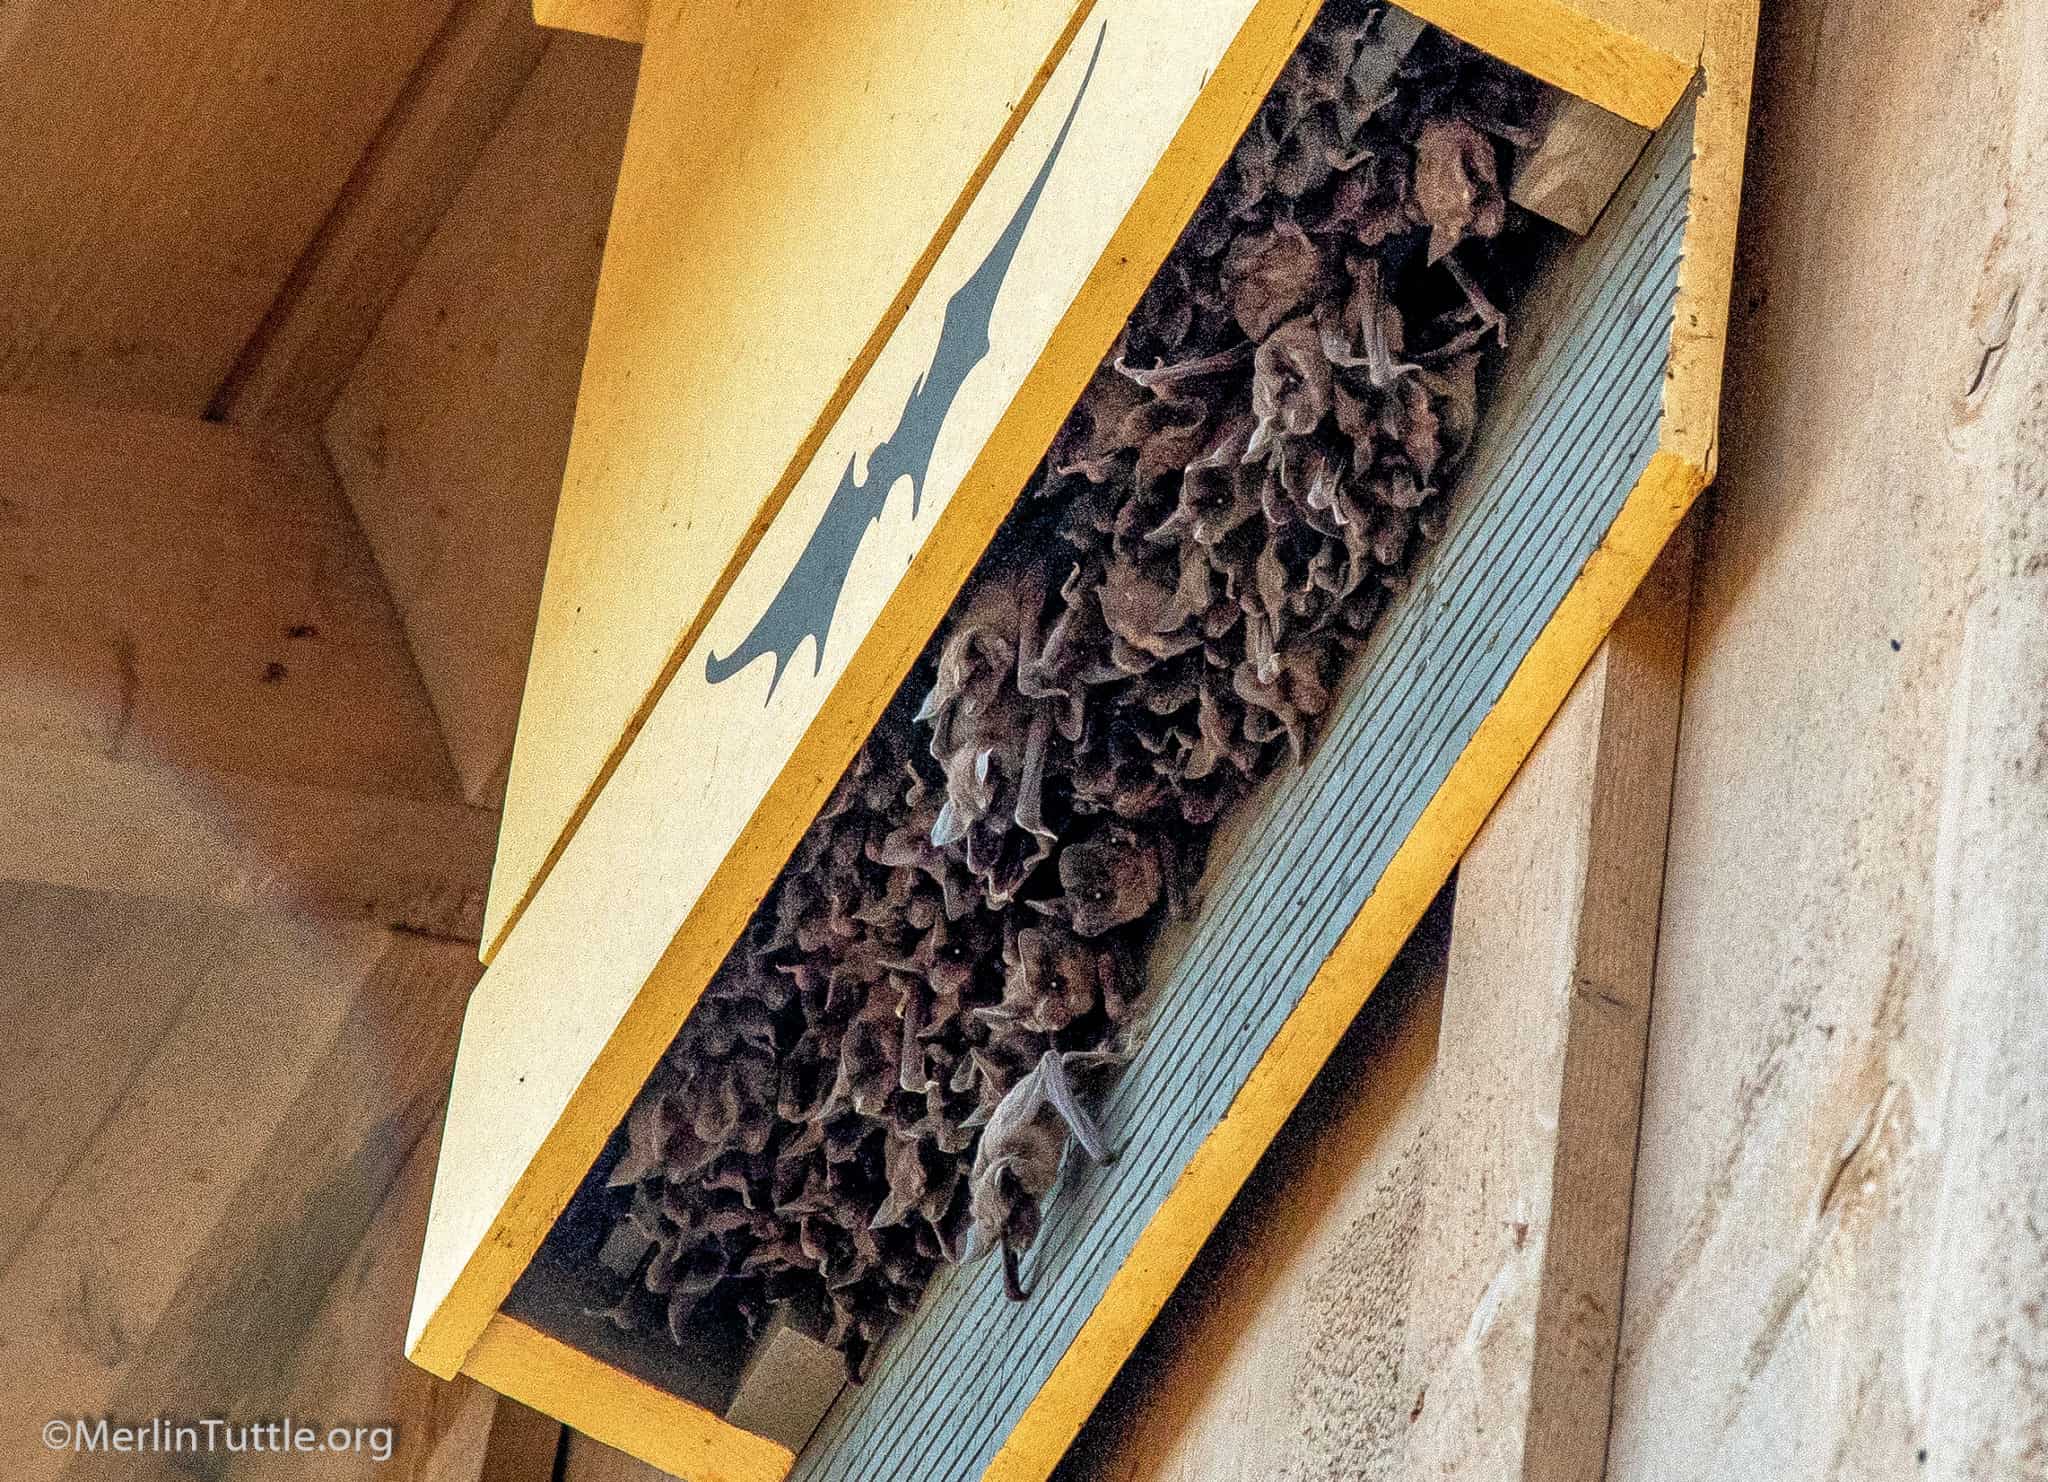 selecting-a-quality-bat-house-merlin-tuttle-s-bat-conservation